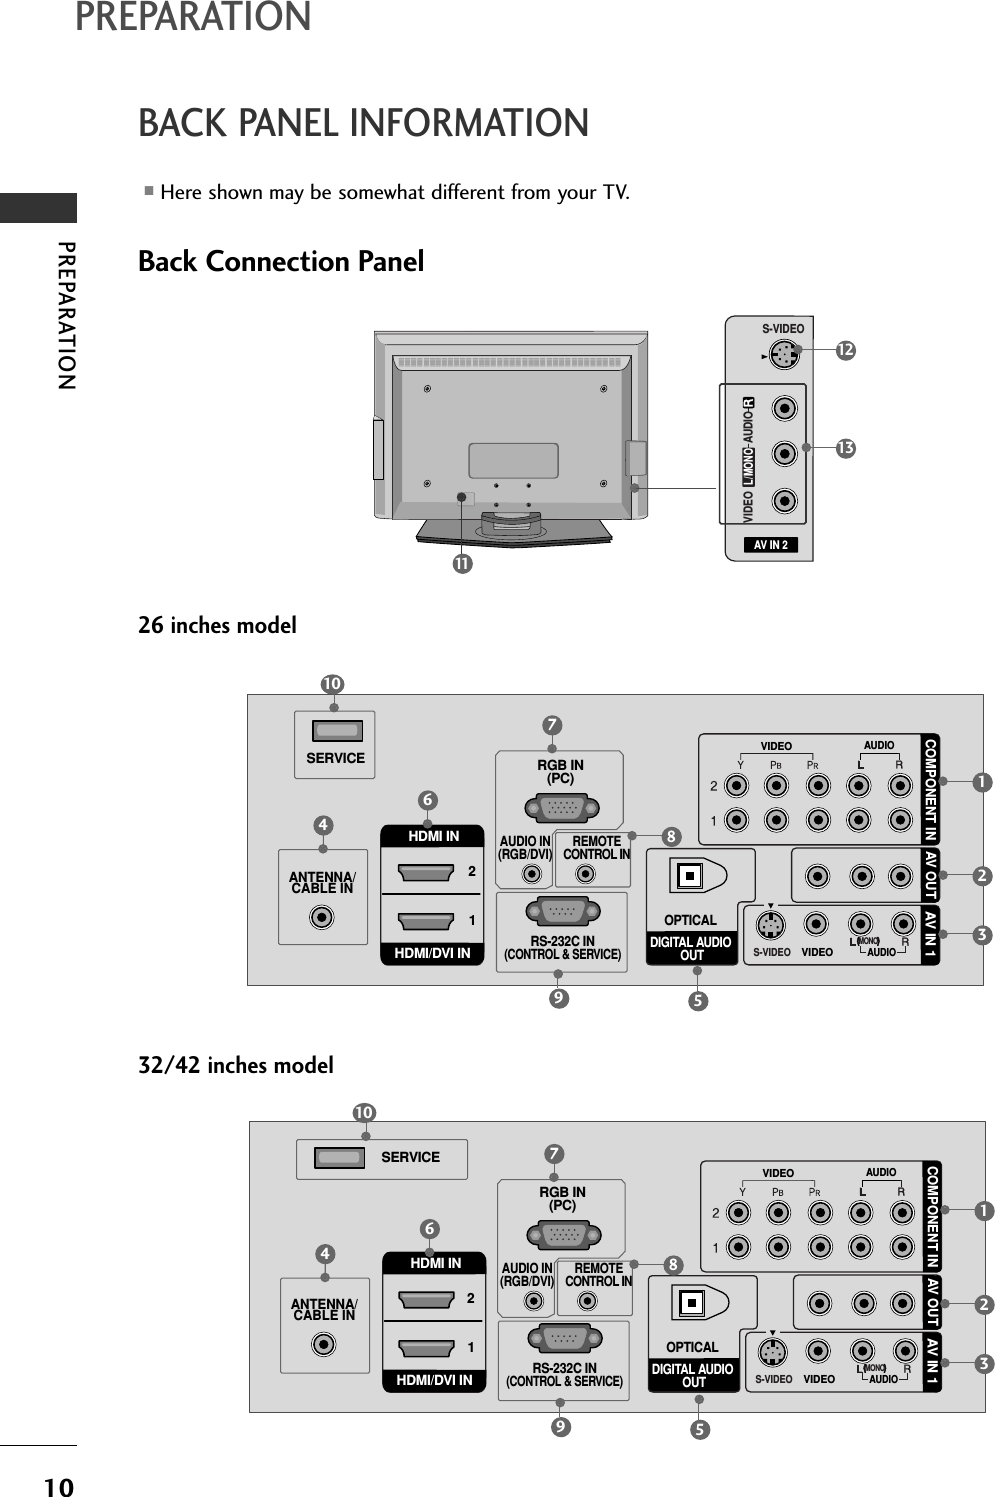 PREPARATION10BACK PANEL INFORMATIONPREPARATION26 inches modelBack Connection PanelRHDMI IN HDMI/DVI IN VIDEOAUDIOVIDEOAUDIOMONO(            )S-VIDEOANTENNA/CABLE INREMOTECONTROL INRS-232C IN(CONTROL &amp; SERVICE)RGB IN(PC)AUDIO IN(RGB/DVI)DIGITAL AUDIO OUTOPTICAL12SERVICECOMPONENT IN AV OUTAV IN 12183769510432/42 inches modelAV IN 2L/MONORAUDIOVIDEOS-VIDEO(            )RHDMI IN HDMI/DVI IN VIDEOAUDIOVIDEOAUDIOMONO(            )S-VIDEOANTENNA/CABLE INREMOTECONTROL INRS-232C IN(CONTROL &amp; SERVICE)RGB IN(PC)AUDIO IN(RGB/DVI)DIGITAL AUDIO OUTOPTICAL12SERVICECOMPONENT IN AV OUTAV IN 121131283769510411■Here shown may be somewhat different from your TV.